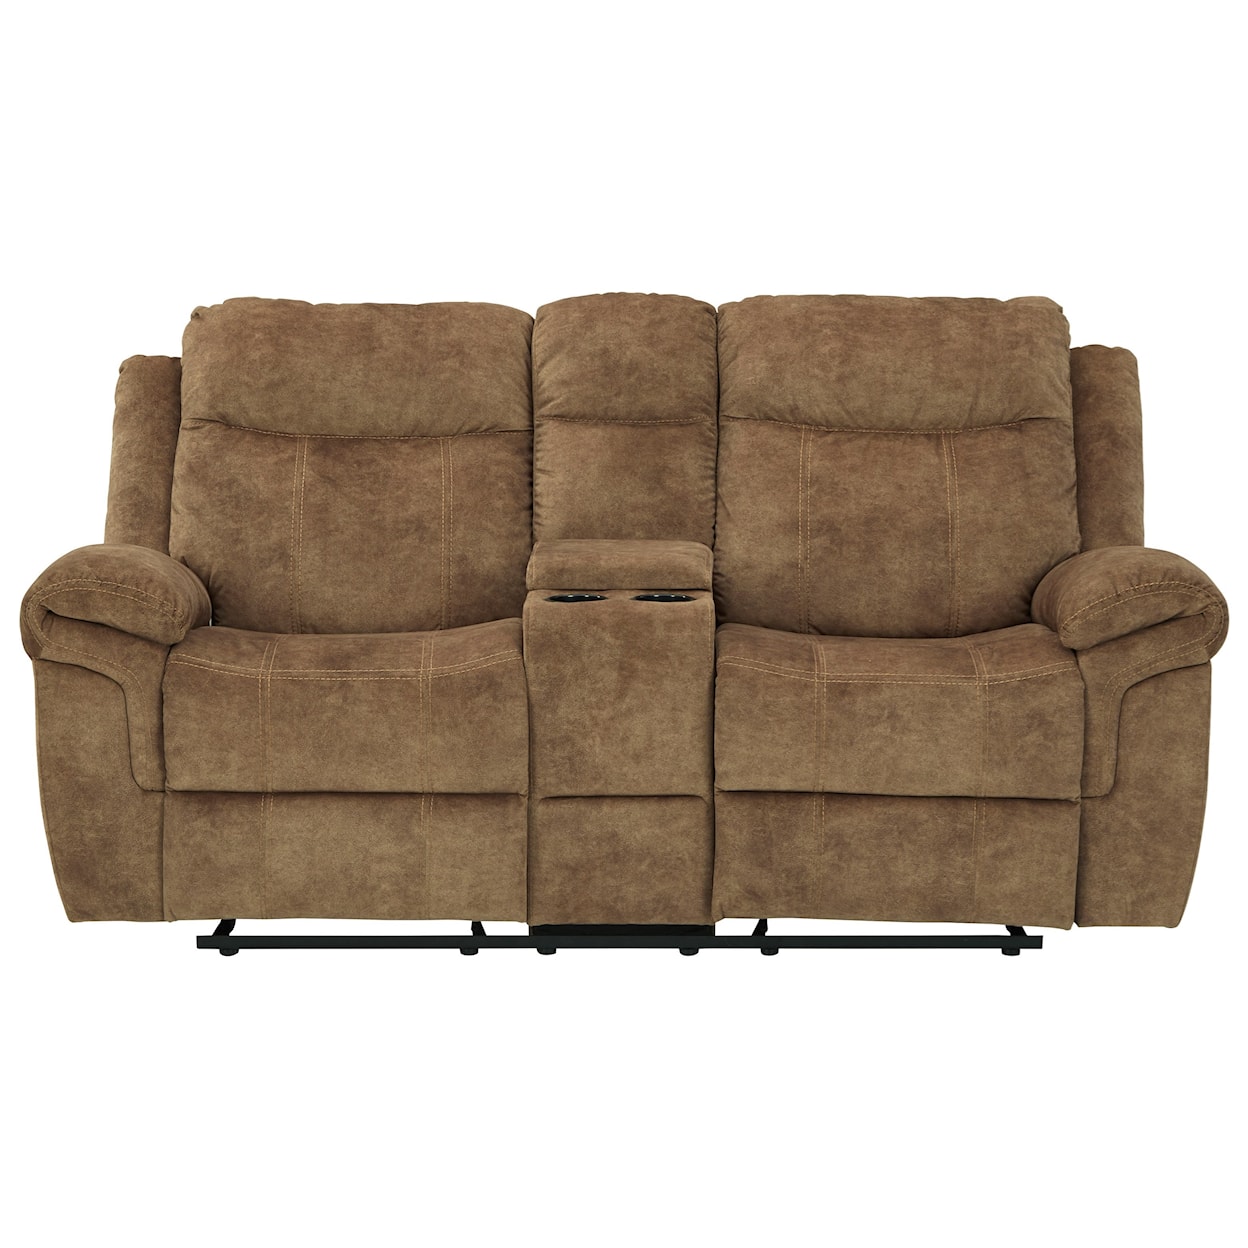 Signature Design by Ashley Huddle-Up Double Reclining Loveseat w/ Console